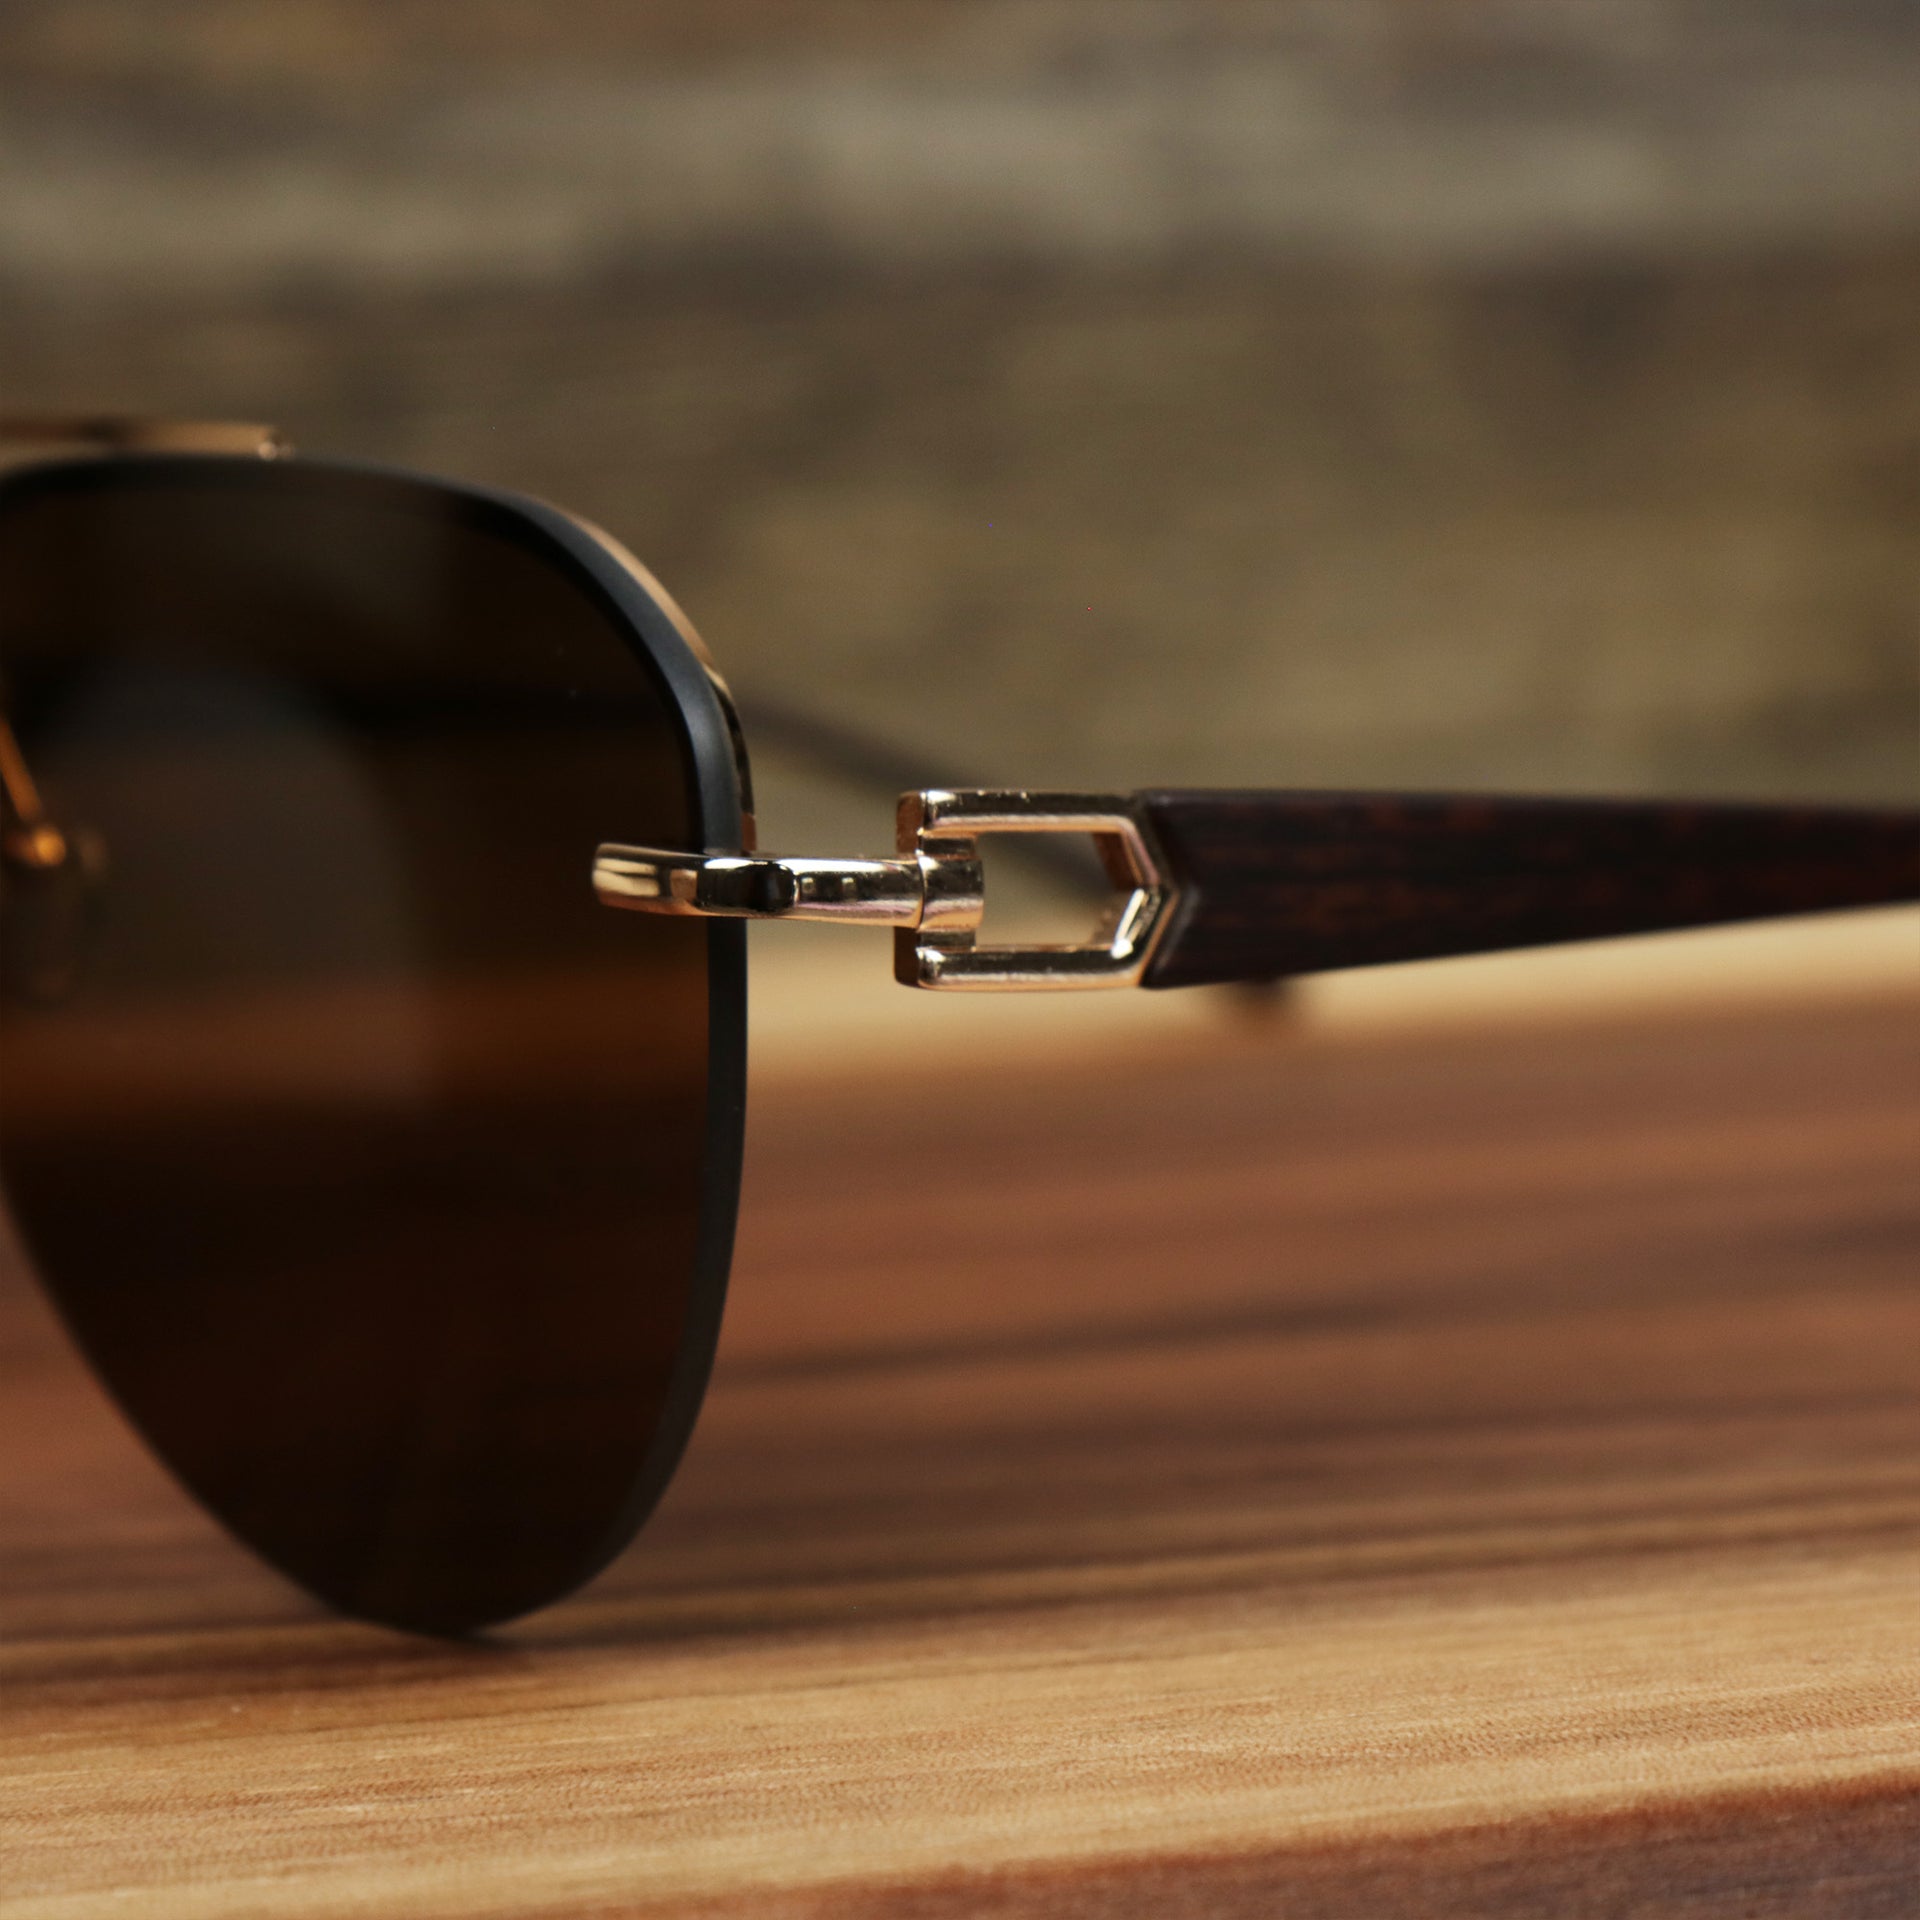 The hinge on the Round Aviator Frames Brown Lens Sunglasses with Gold Frame